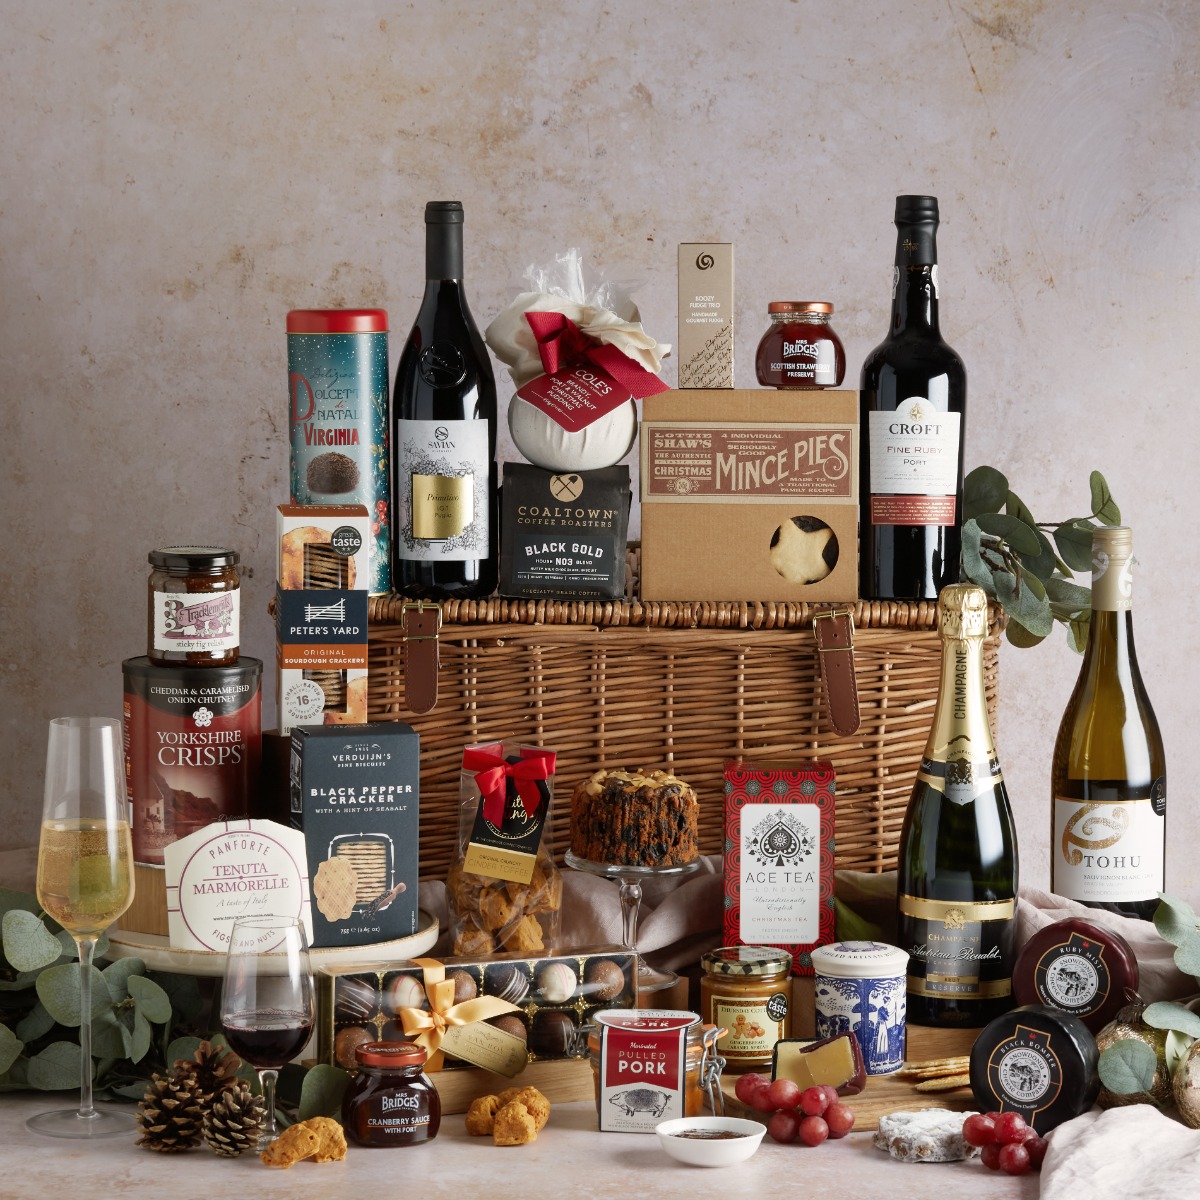 The Grand Christmas Hamper with large wicker basket and food and drink items on display